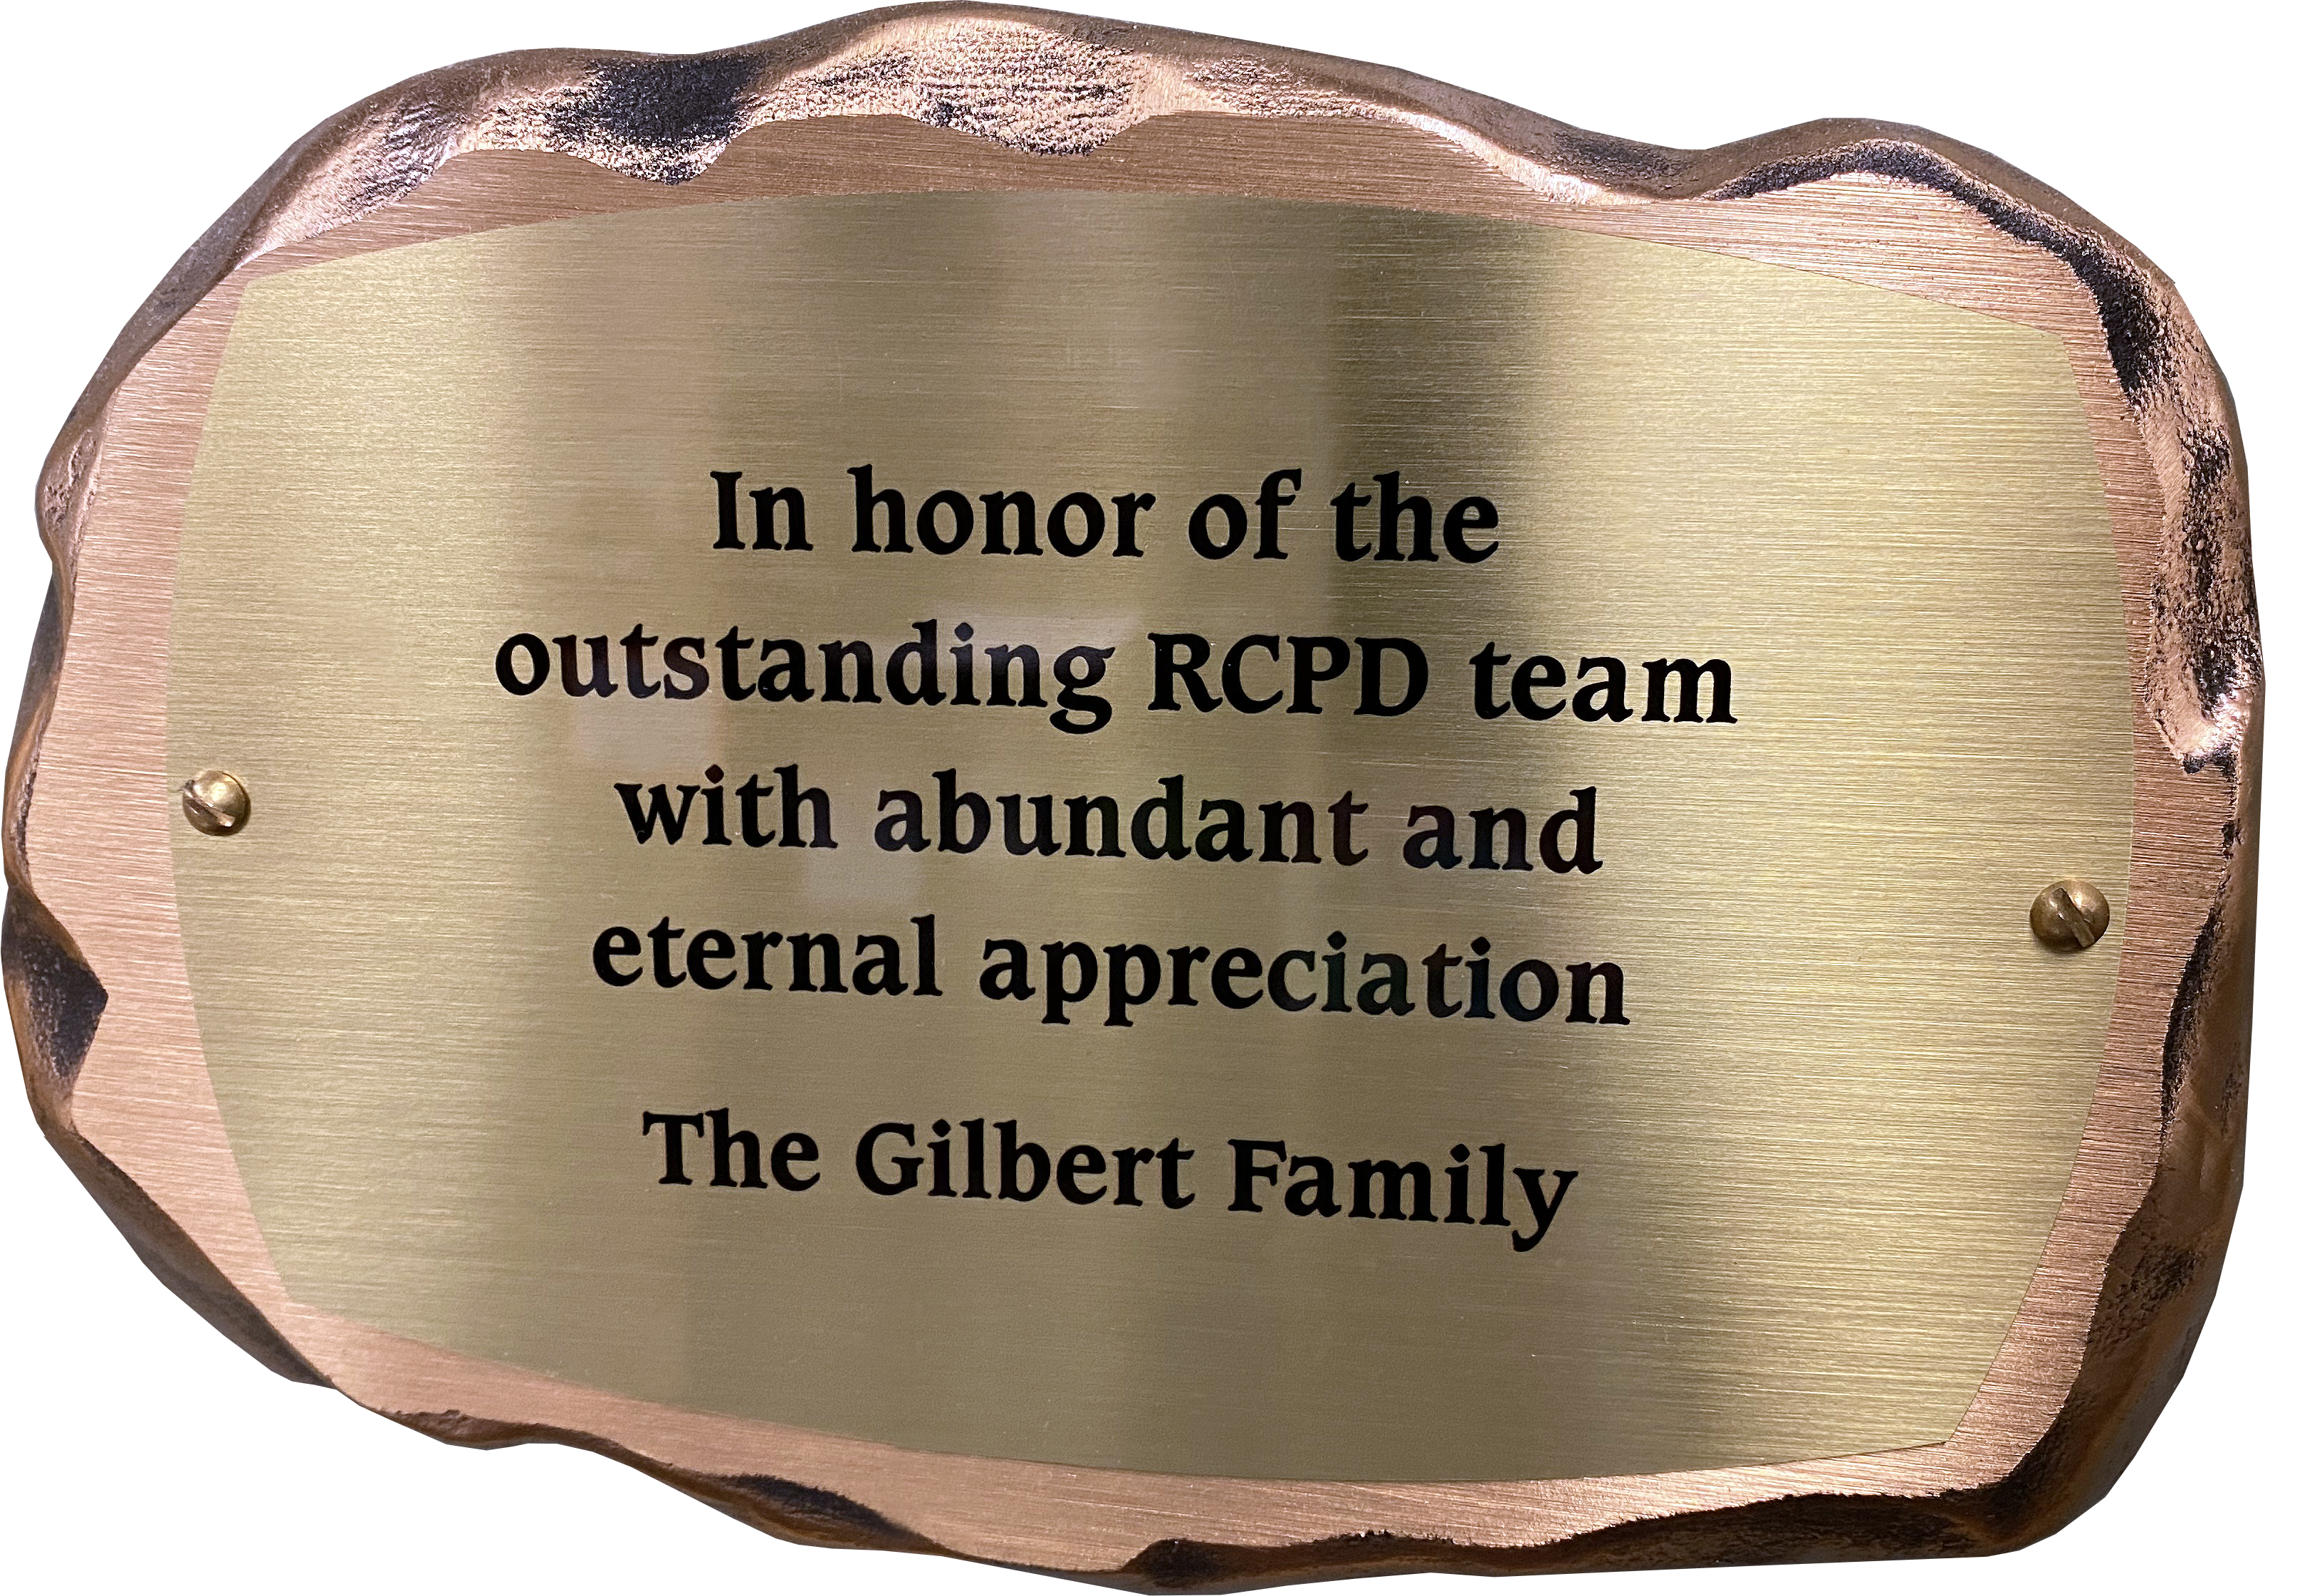 Inscribed bronze plaque in the shape of a rock with text on it reading: In honor of the outstanding RCPD team with abundant and eternal appreciation. The Gilbert Family